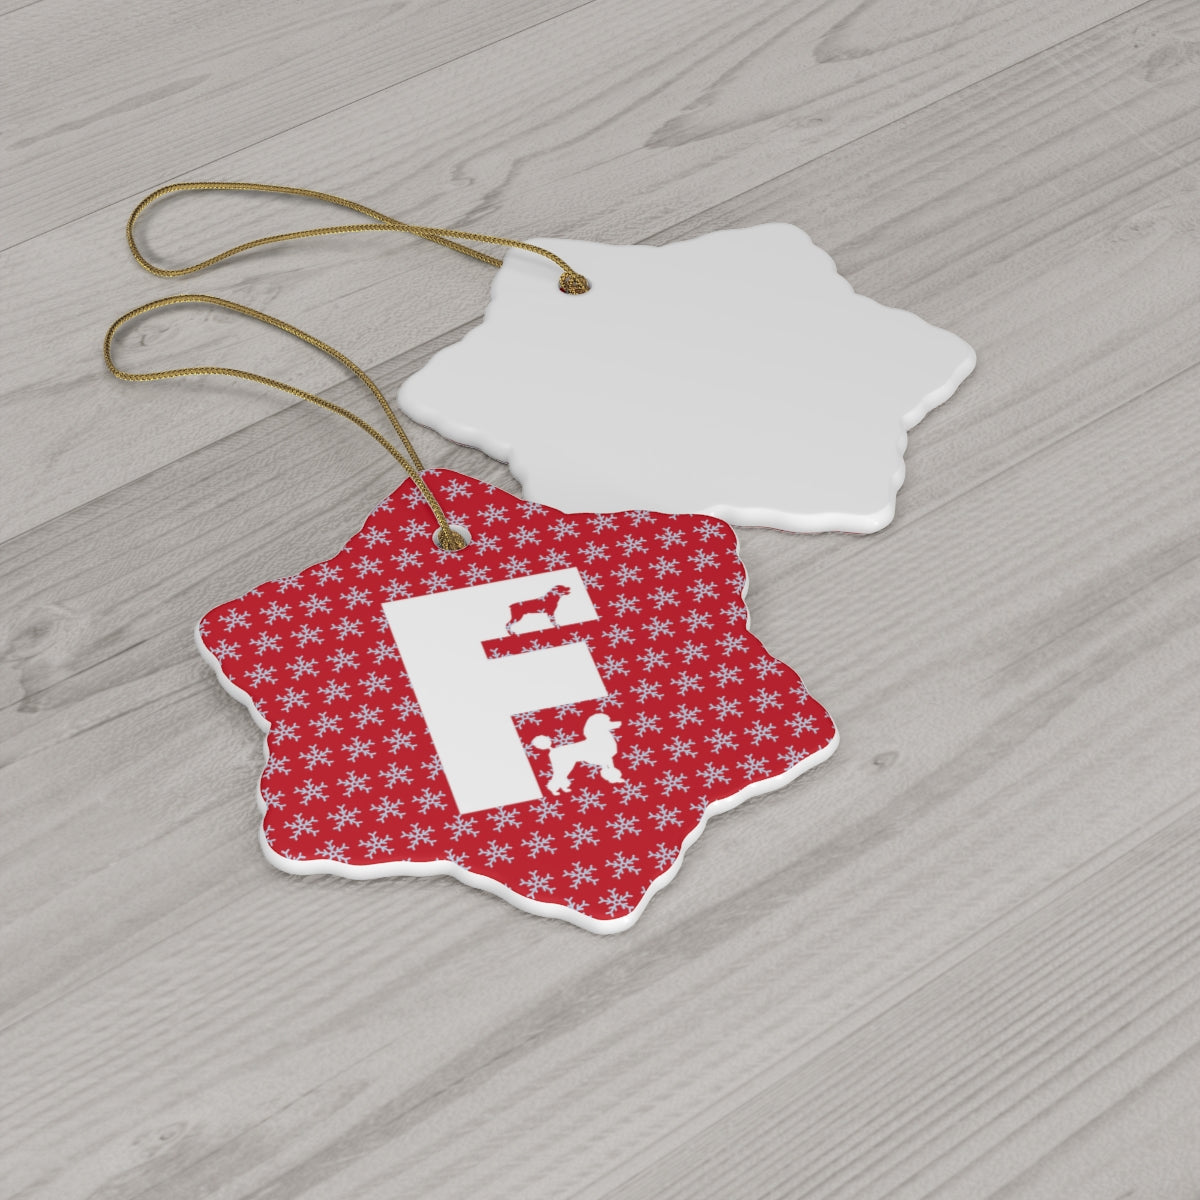 Ceramic Dog Monogram F Ornament - Red, 4 Shapes - 3 Red Rovers